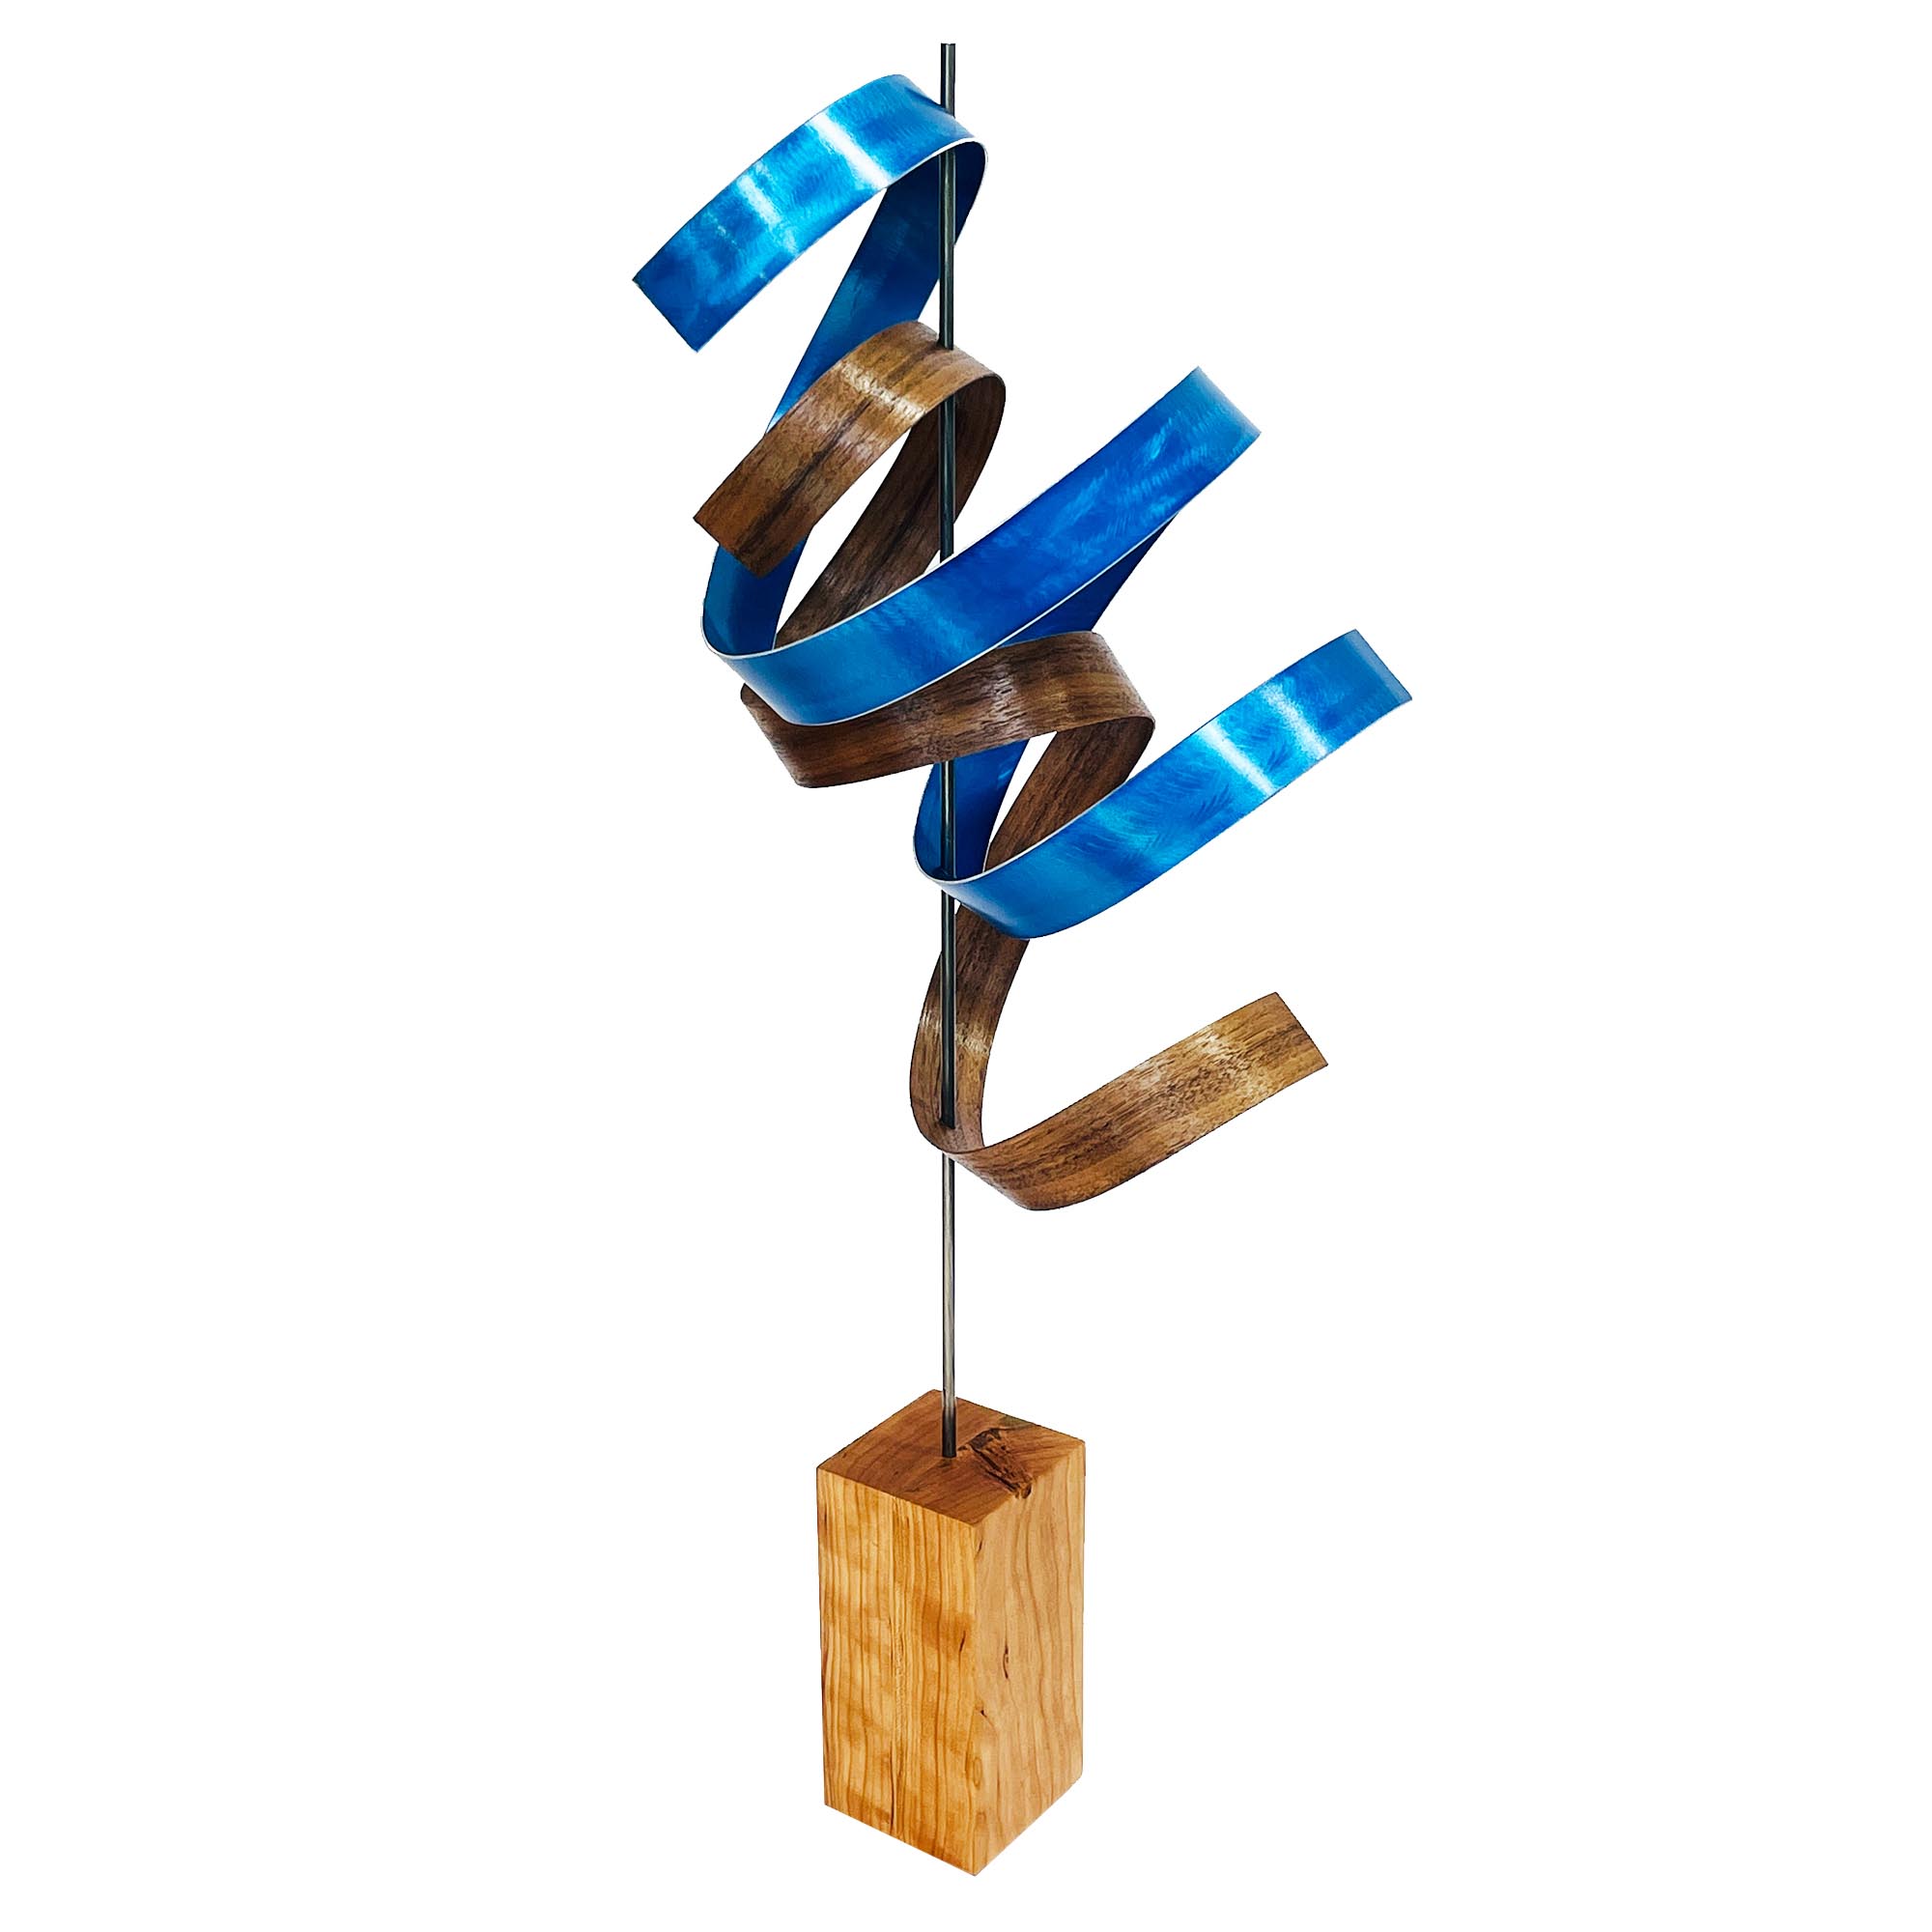 Ribbon Cherry by Jackson Wright - Abstract Wood Sculpture, Kinetic Sculpture - Image 3